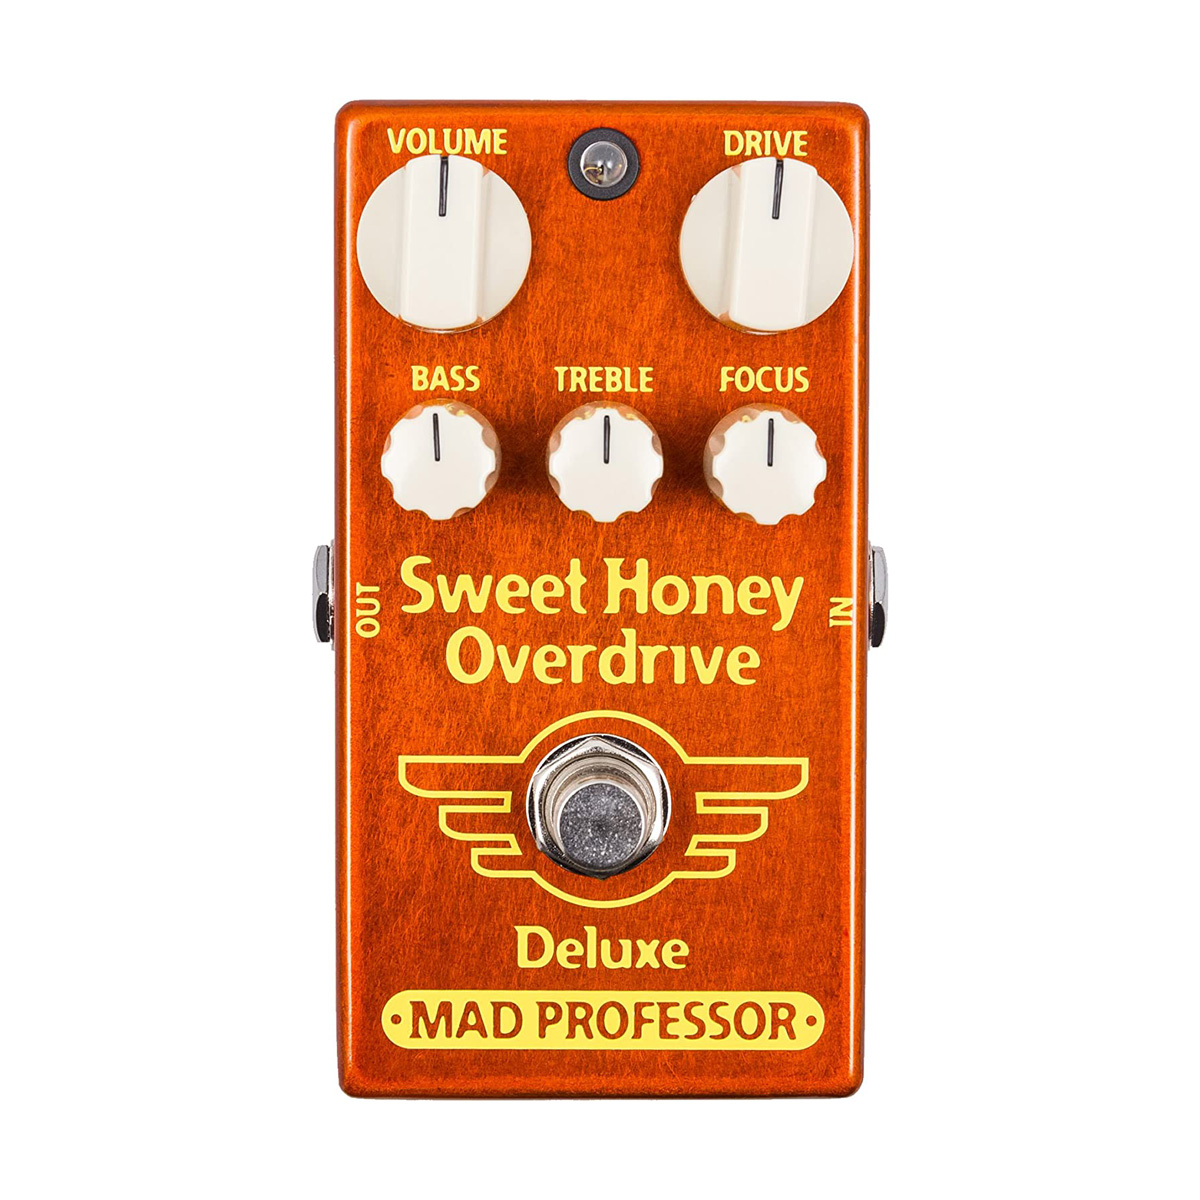 Overdrive　Professor　Mad　Pedal　Sweet　Honey　Smooth　Guitar